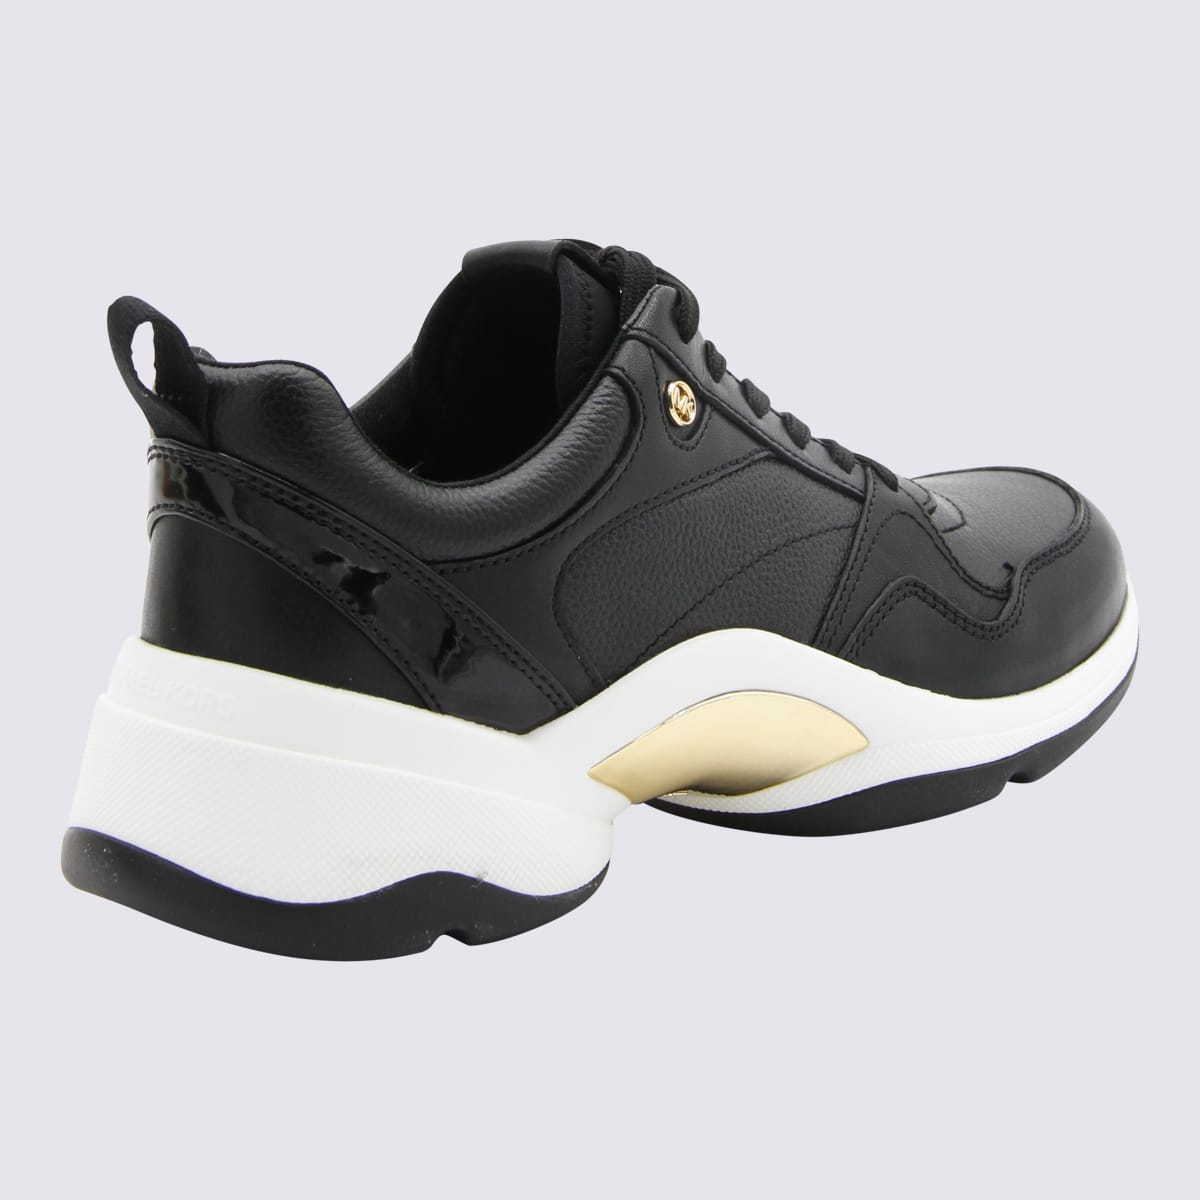 Black Leather Orion Trainer Sneakers